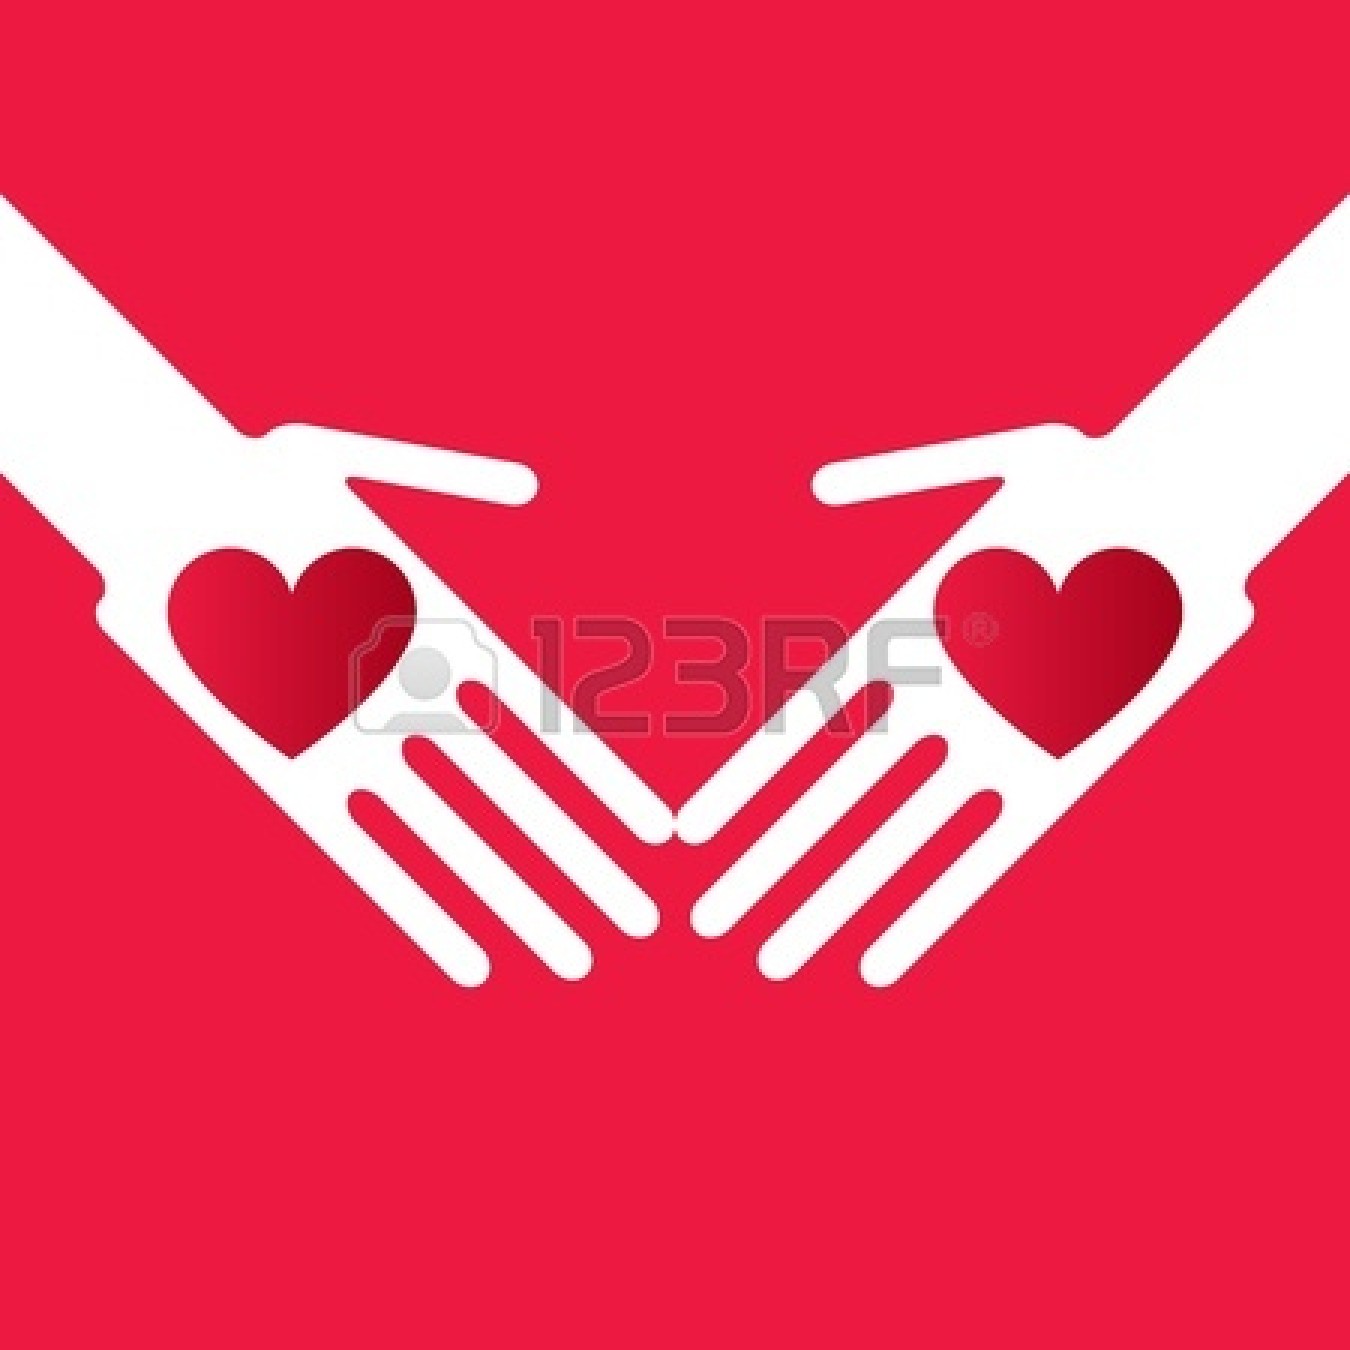 Giving Hands Clipart   Clipart Panda   Free Clipart Images